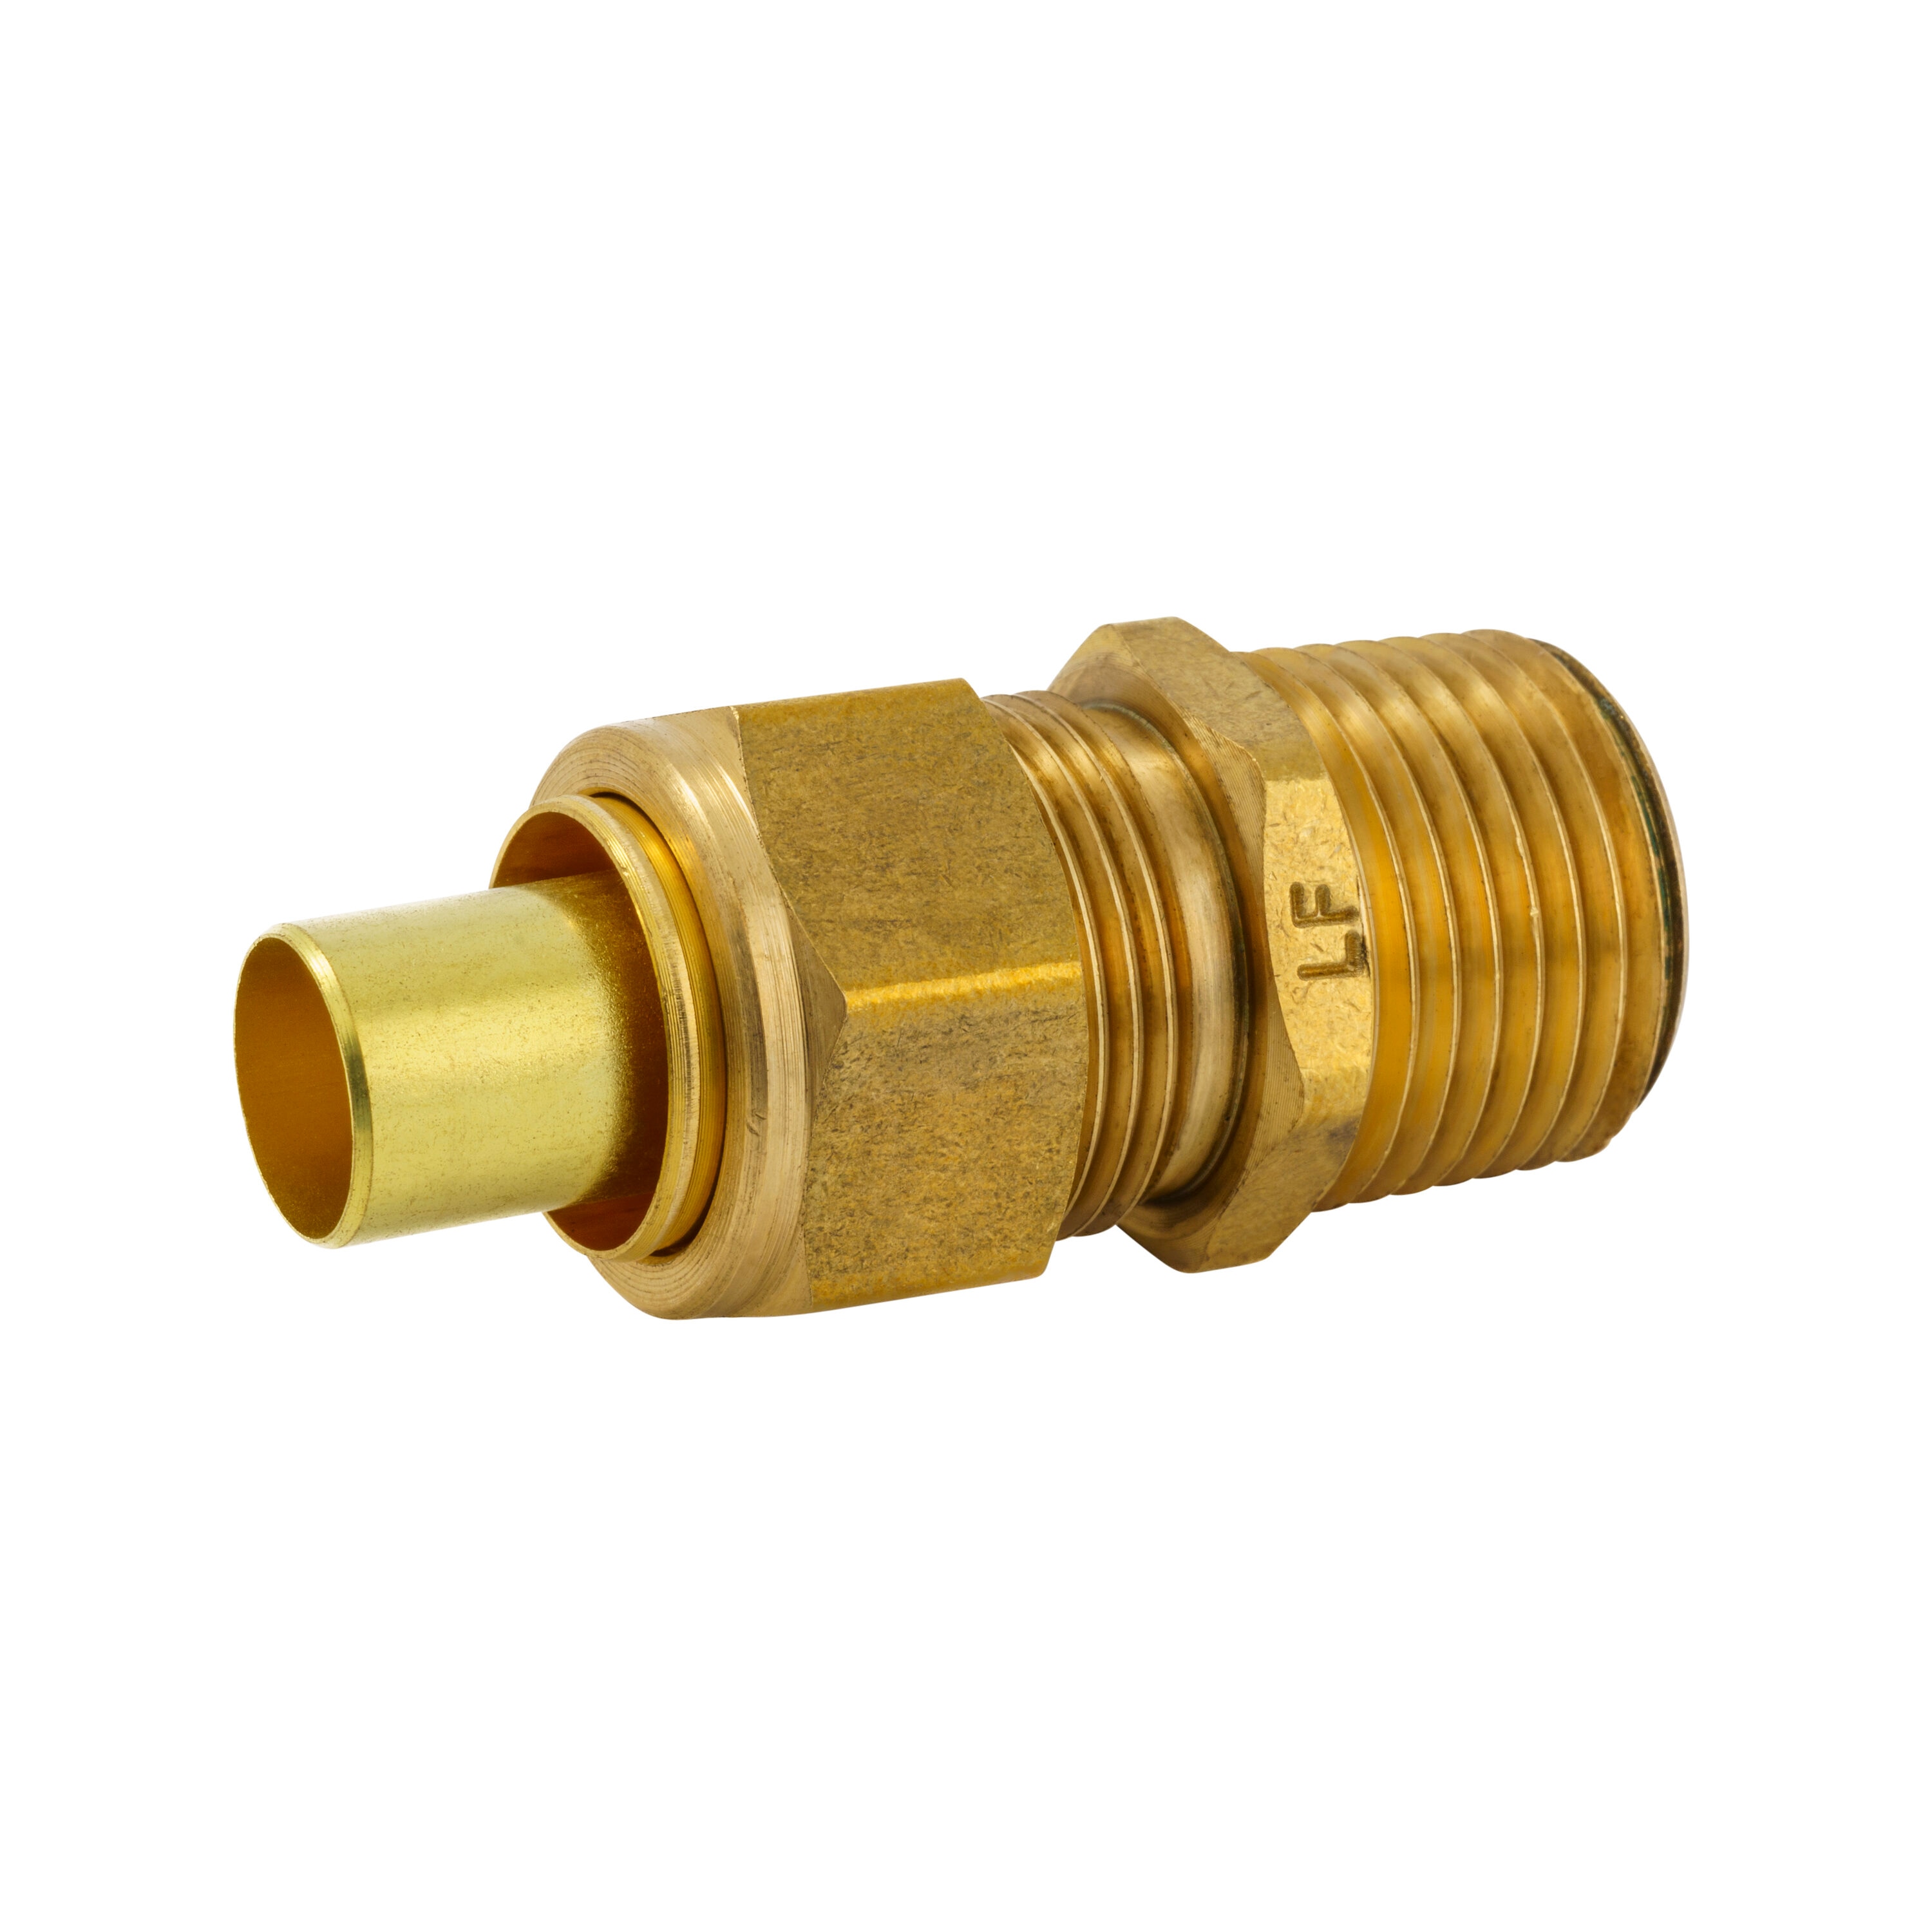 Legines Brass Compression Tube Fitting, Union, 1/8 OD x 1/8 OD, Pack of 2